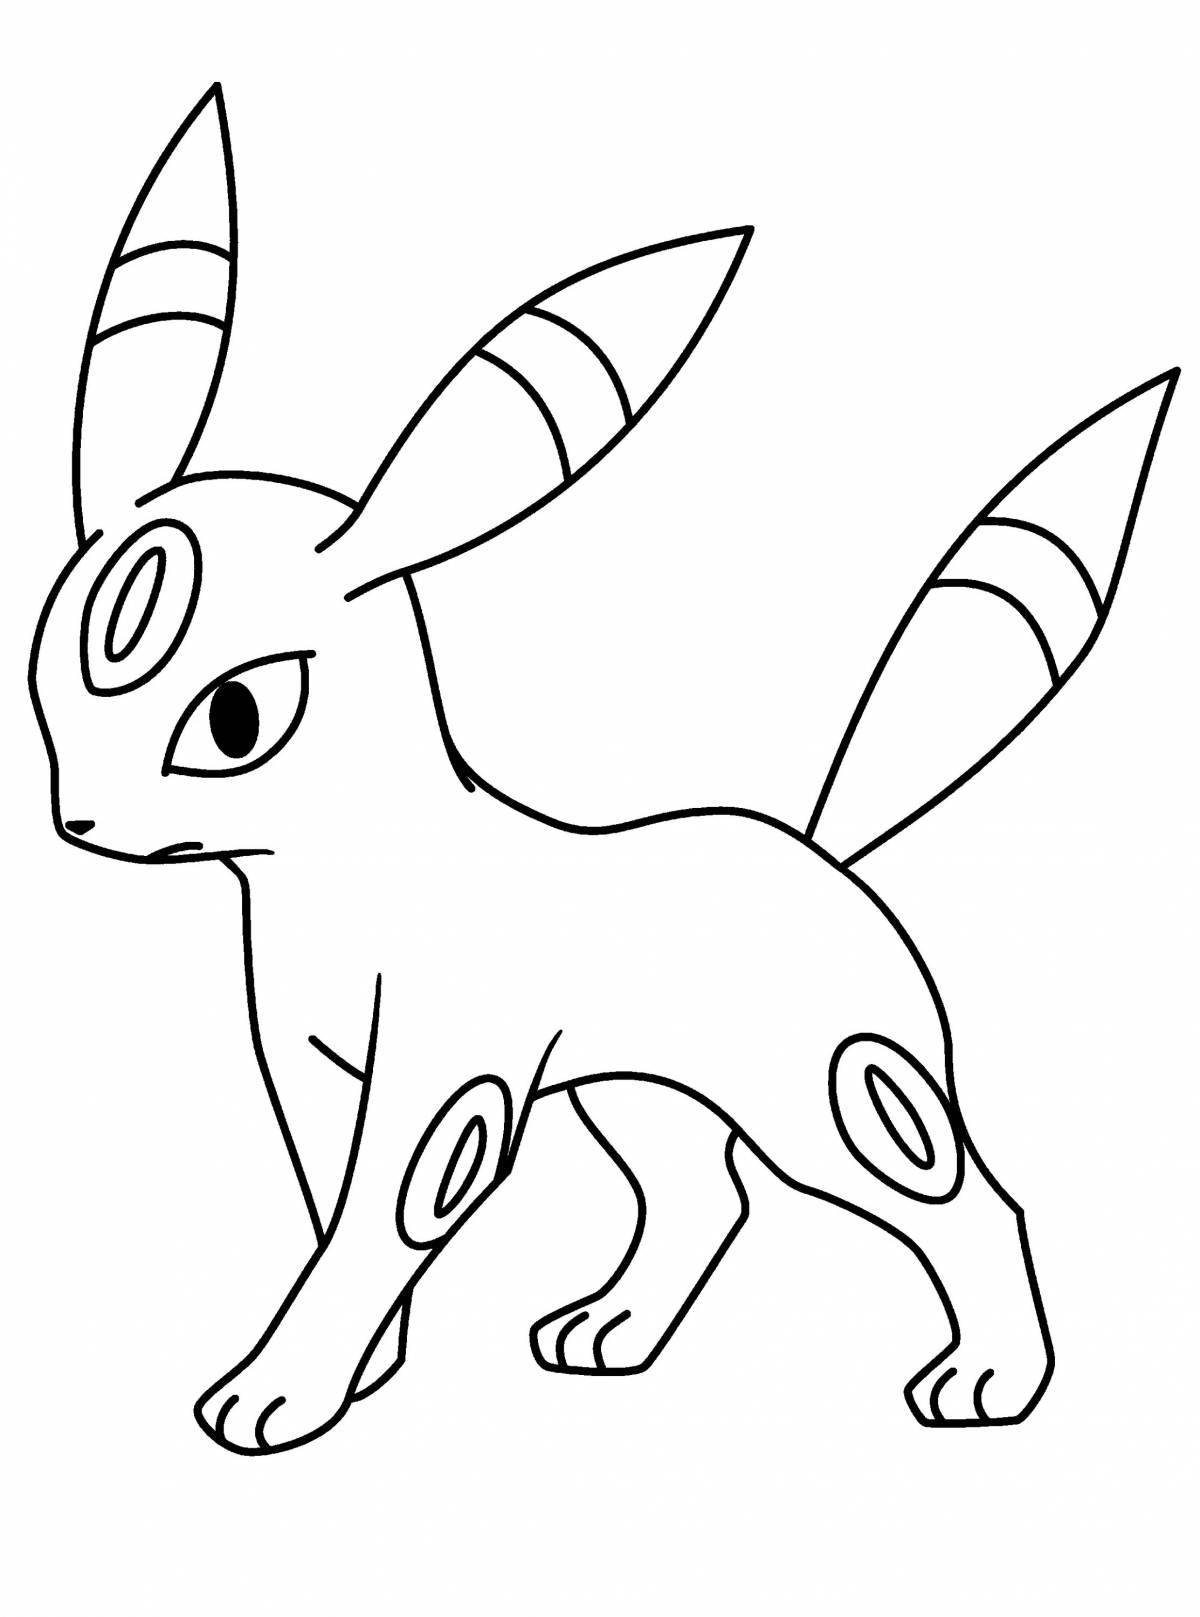 Good quality intricate pokemon coloring page